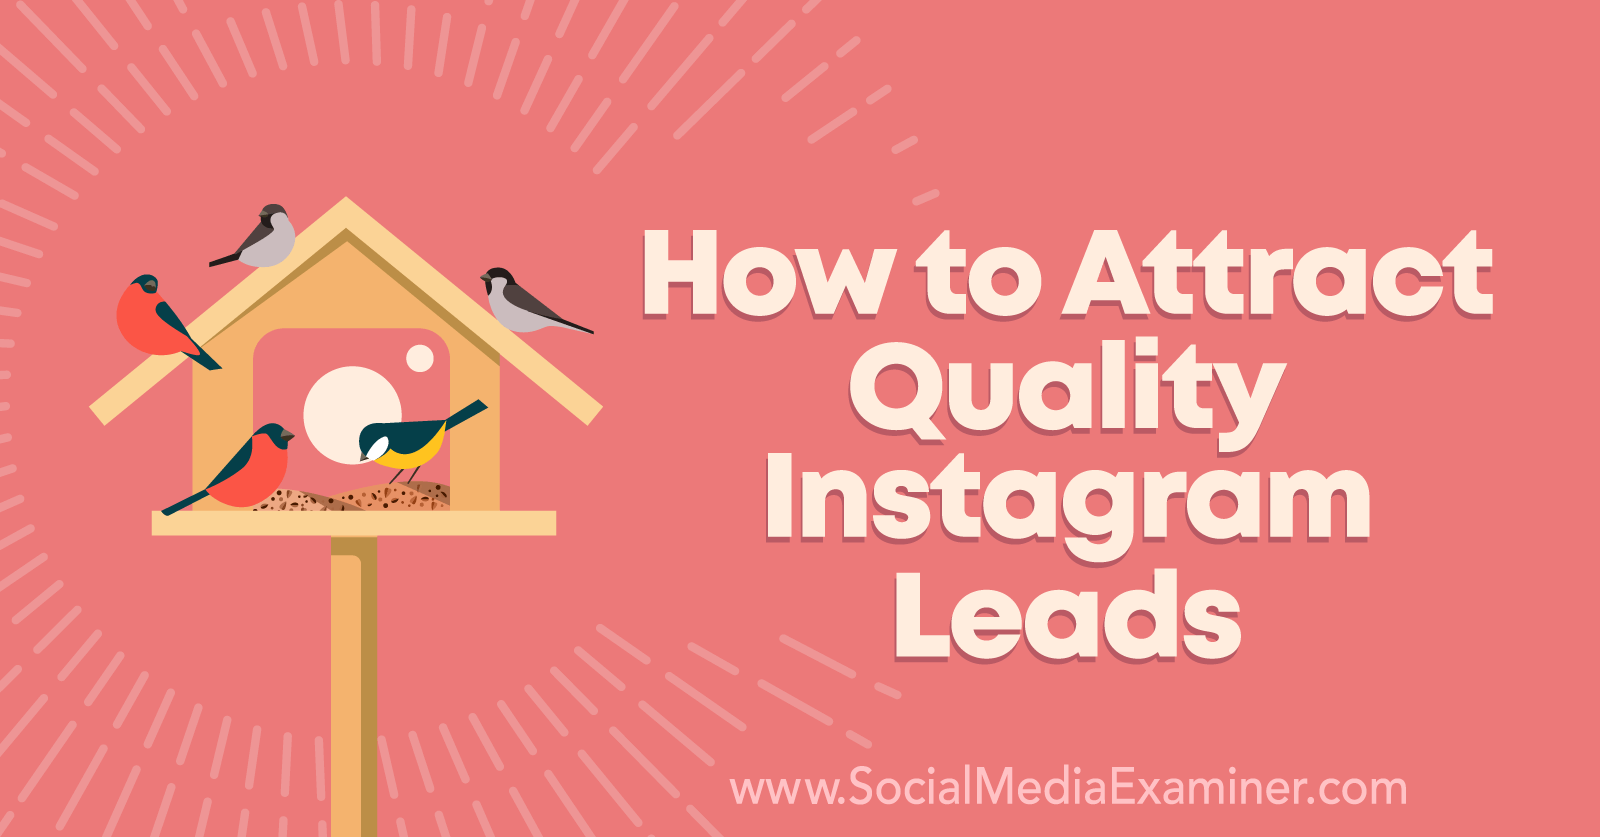 How to Attract Quality Instagram Leads by Anna Sonnenberg on Social Media Examiner.